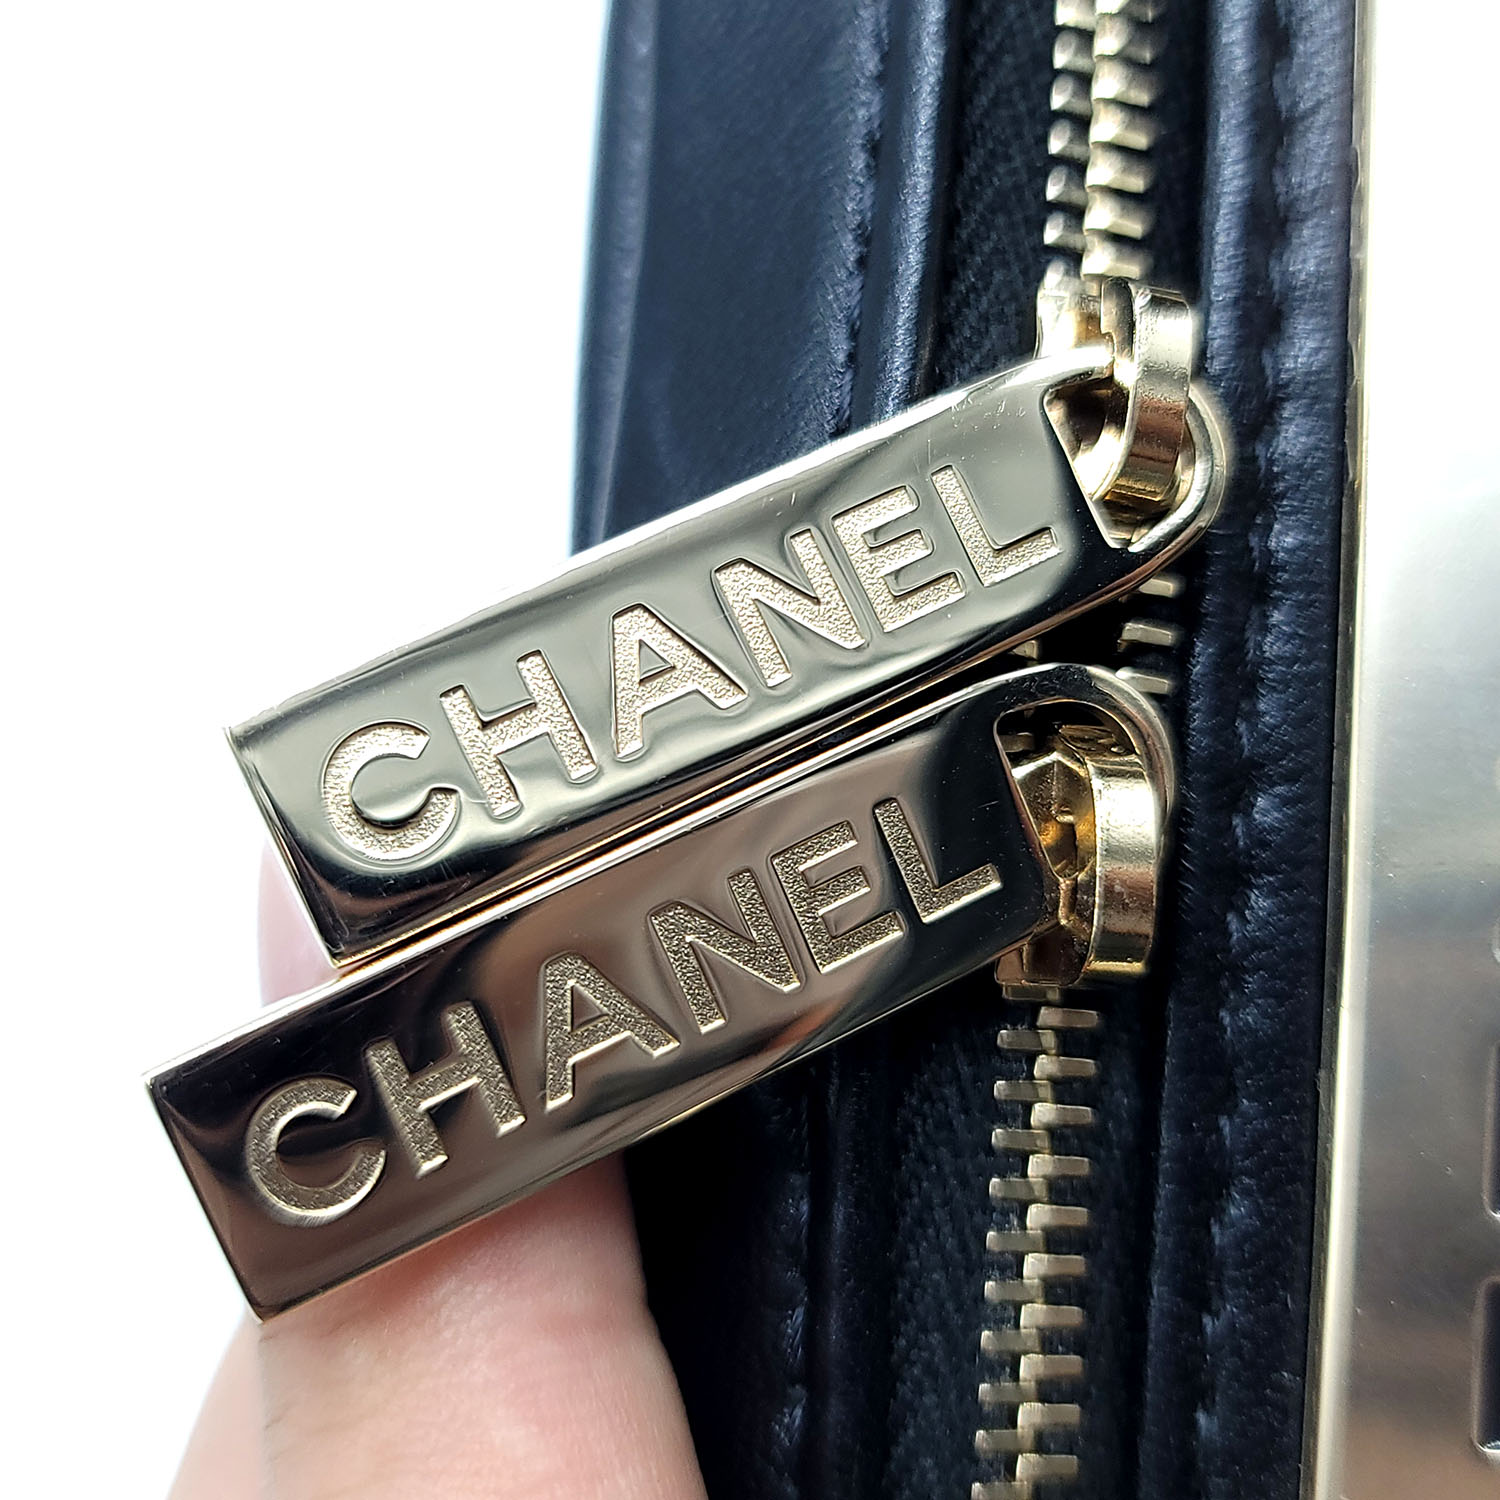 CHANEL BOWLING BAG UNBOXING 💕 FROM VESTIAIRE COLLECTIVE 